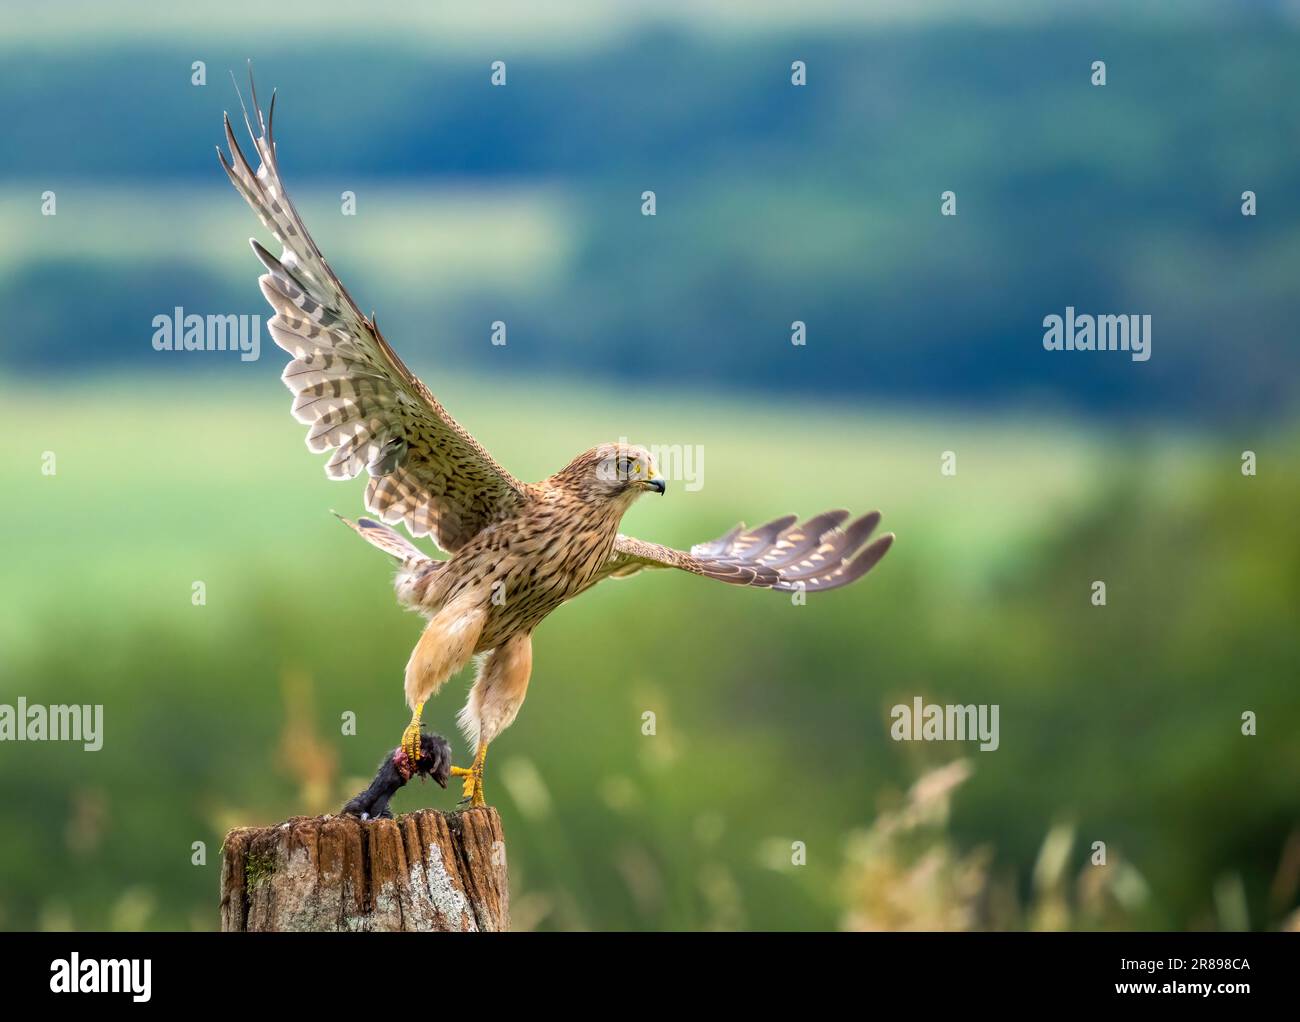 A beautiful female Kestrel, (Falco tinnunculus), takes flight from an old wooden gate post, carrying a Field Mouse it has just caught Stock Photo